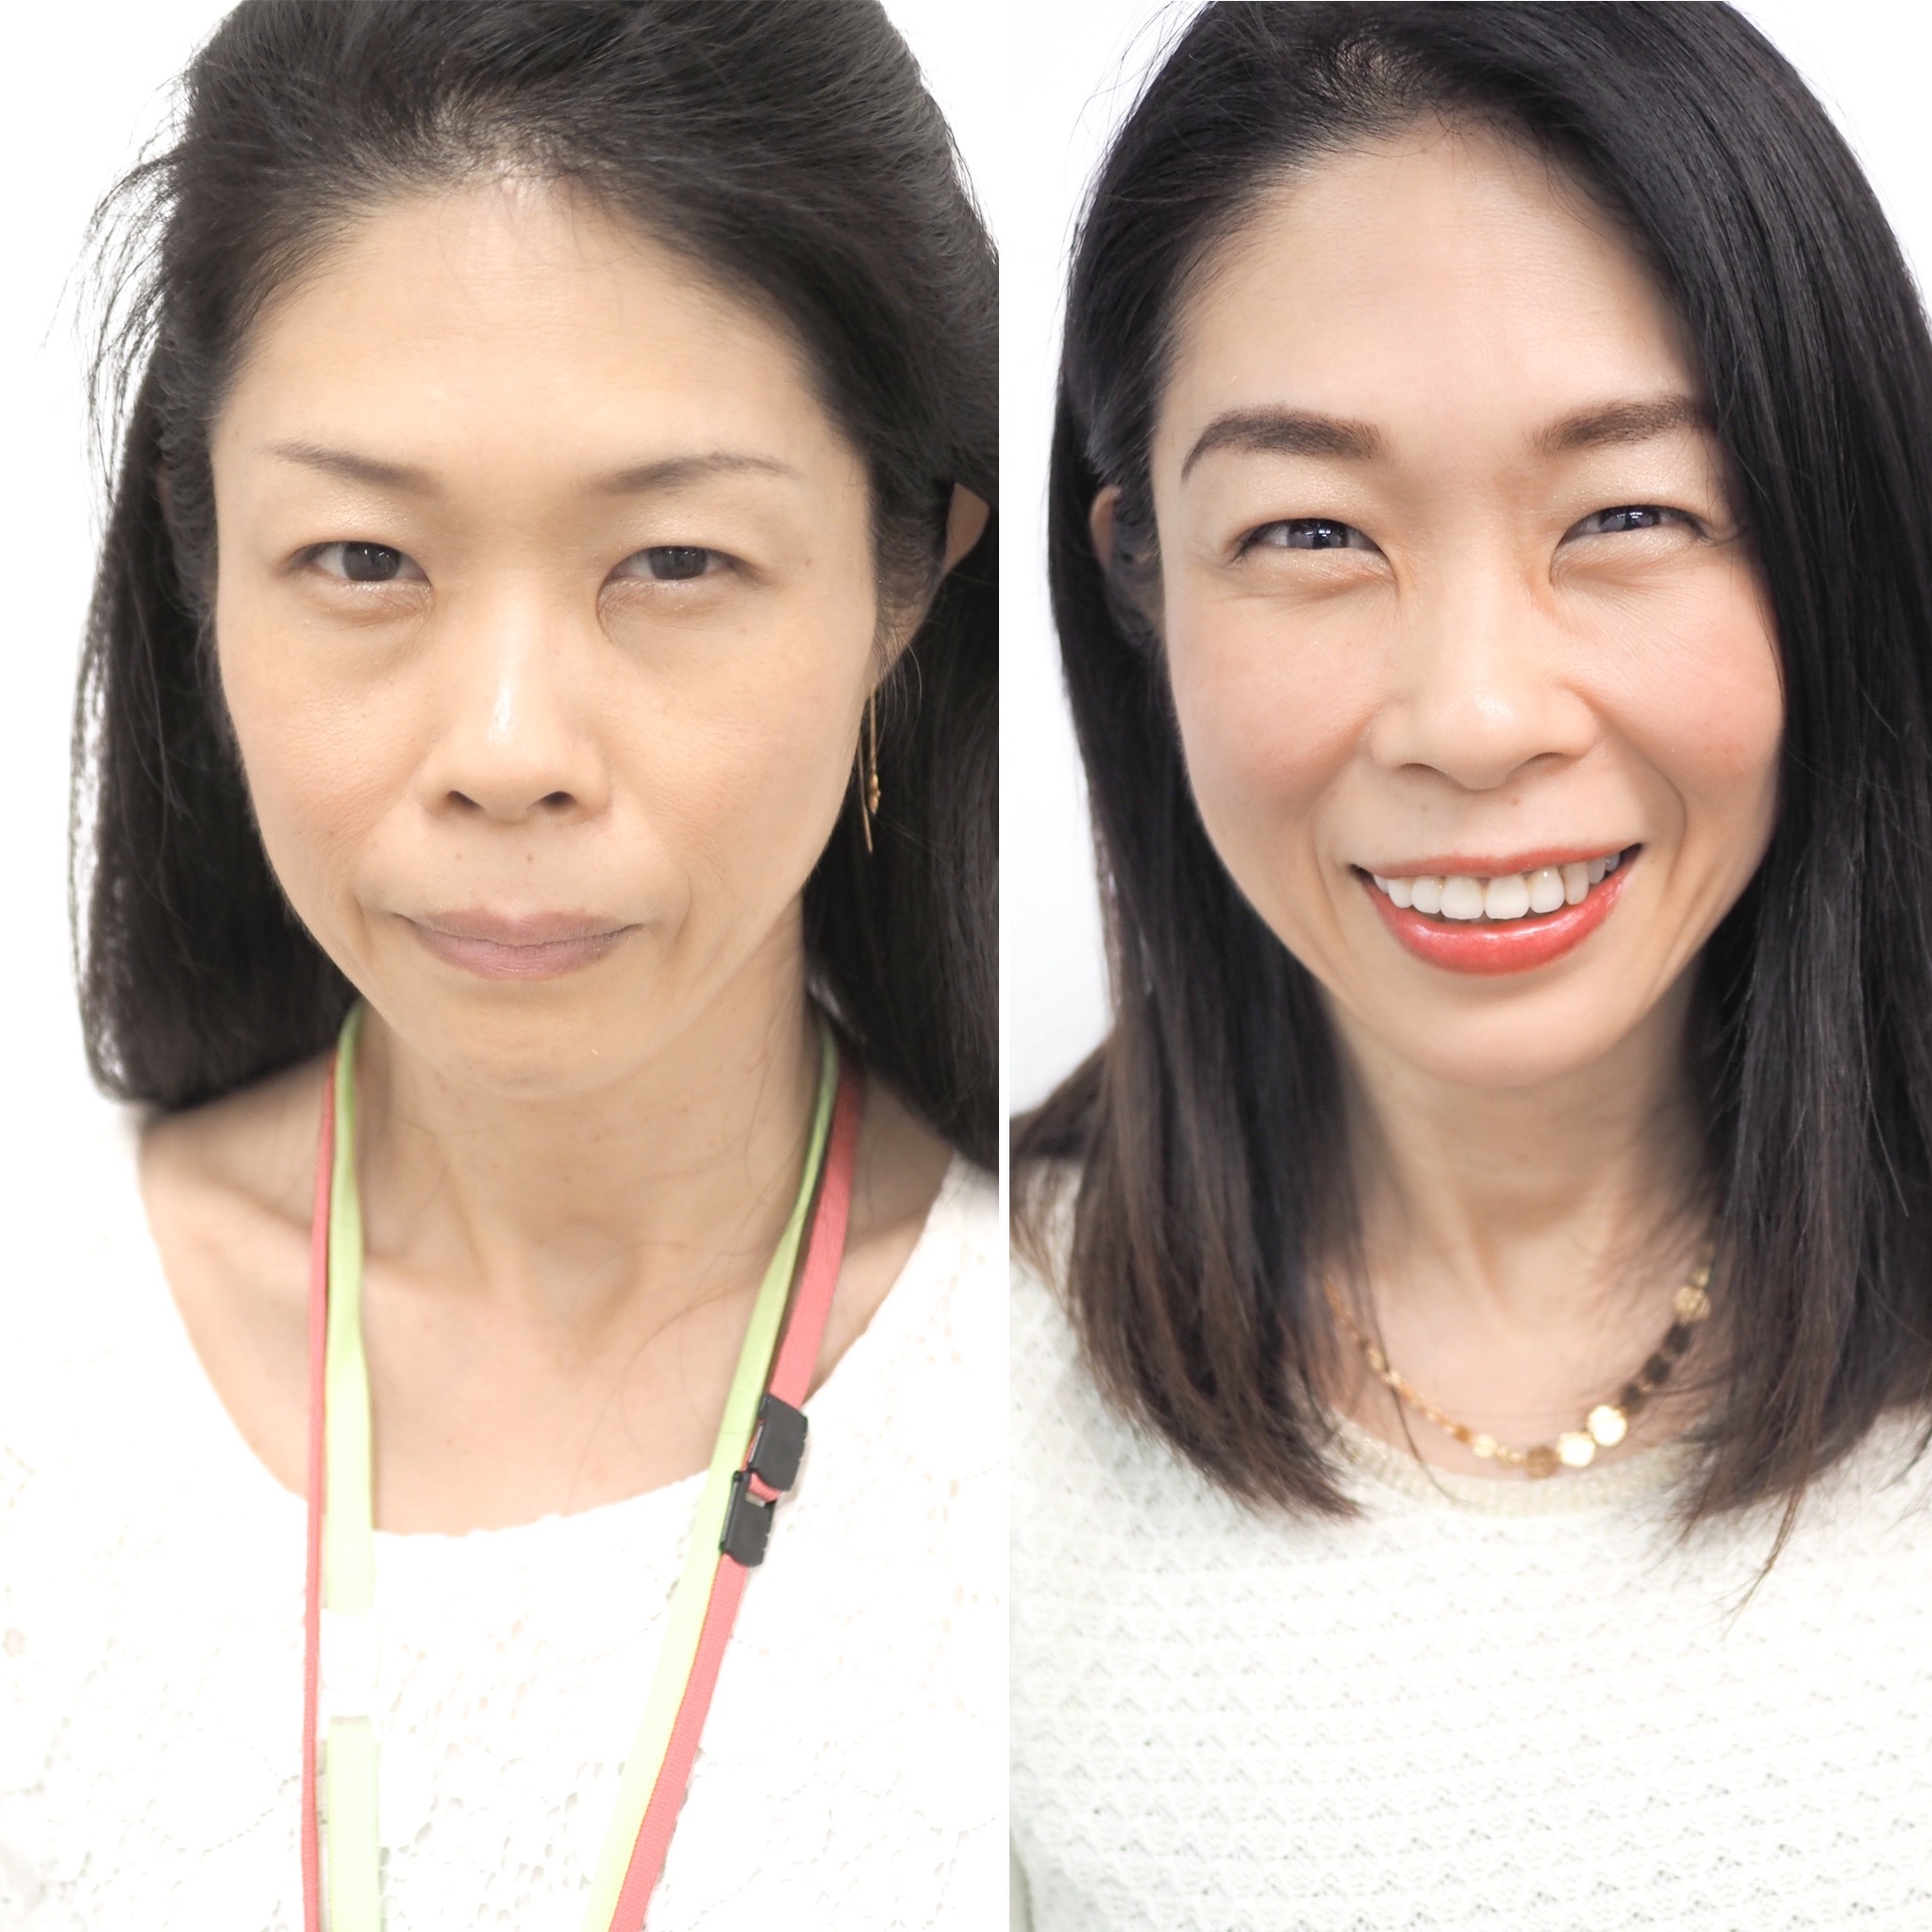 lady-makeup-Corporate training-smile